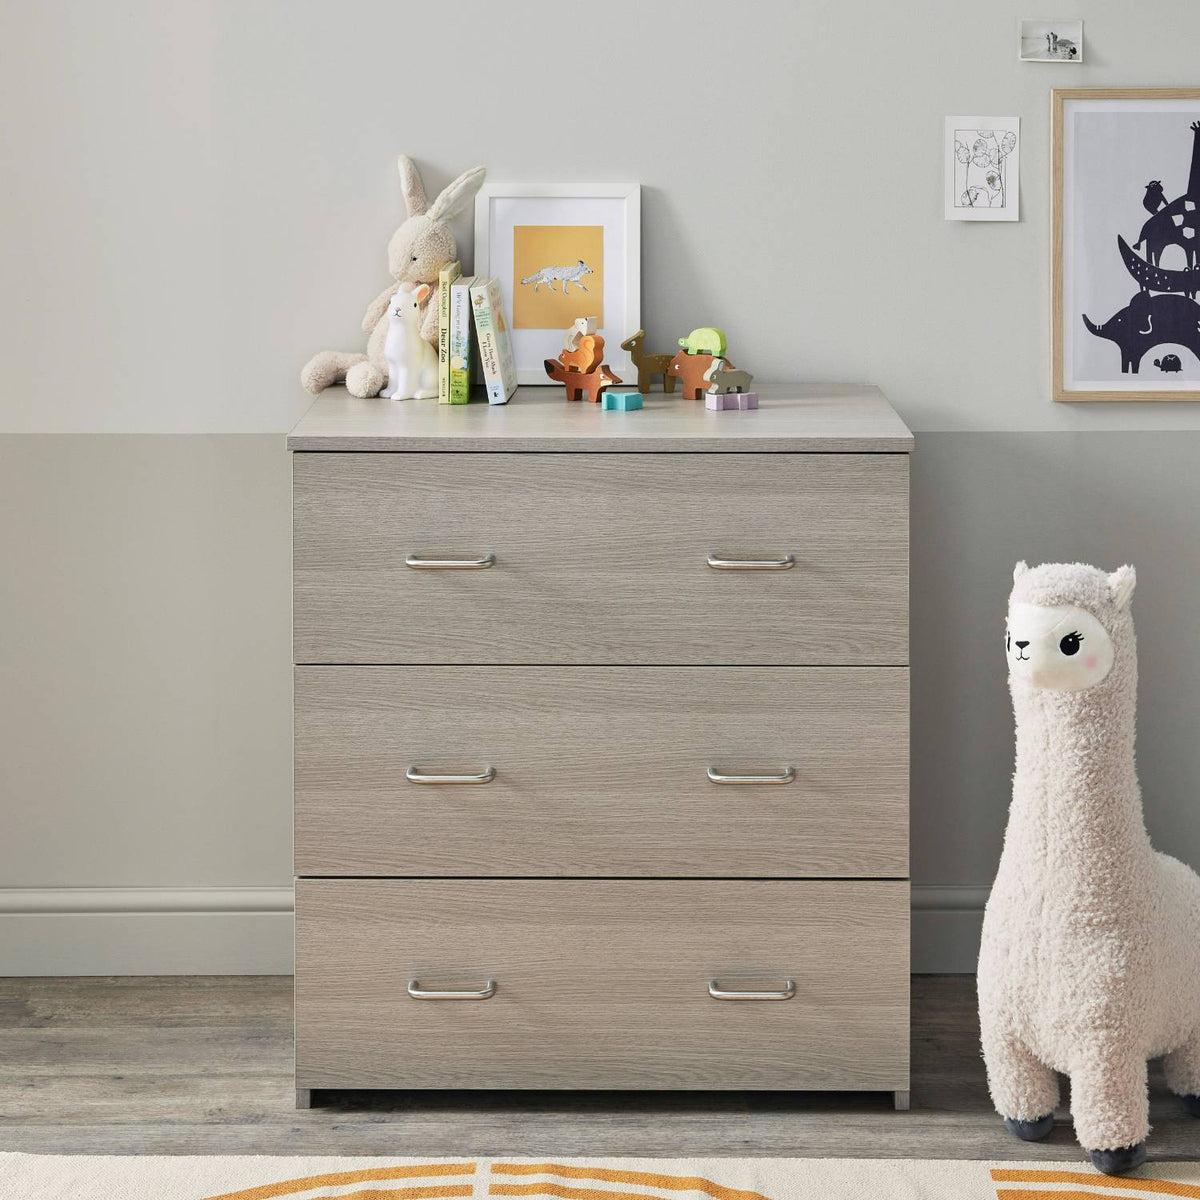 Babymore Caro Nursery Chest Changer in Grey Wash color with changer top removed and replaced with baby books